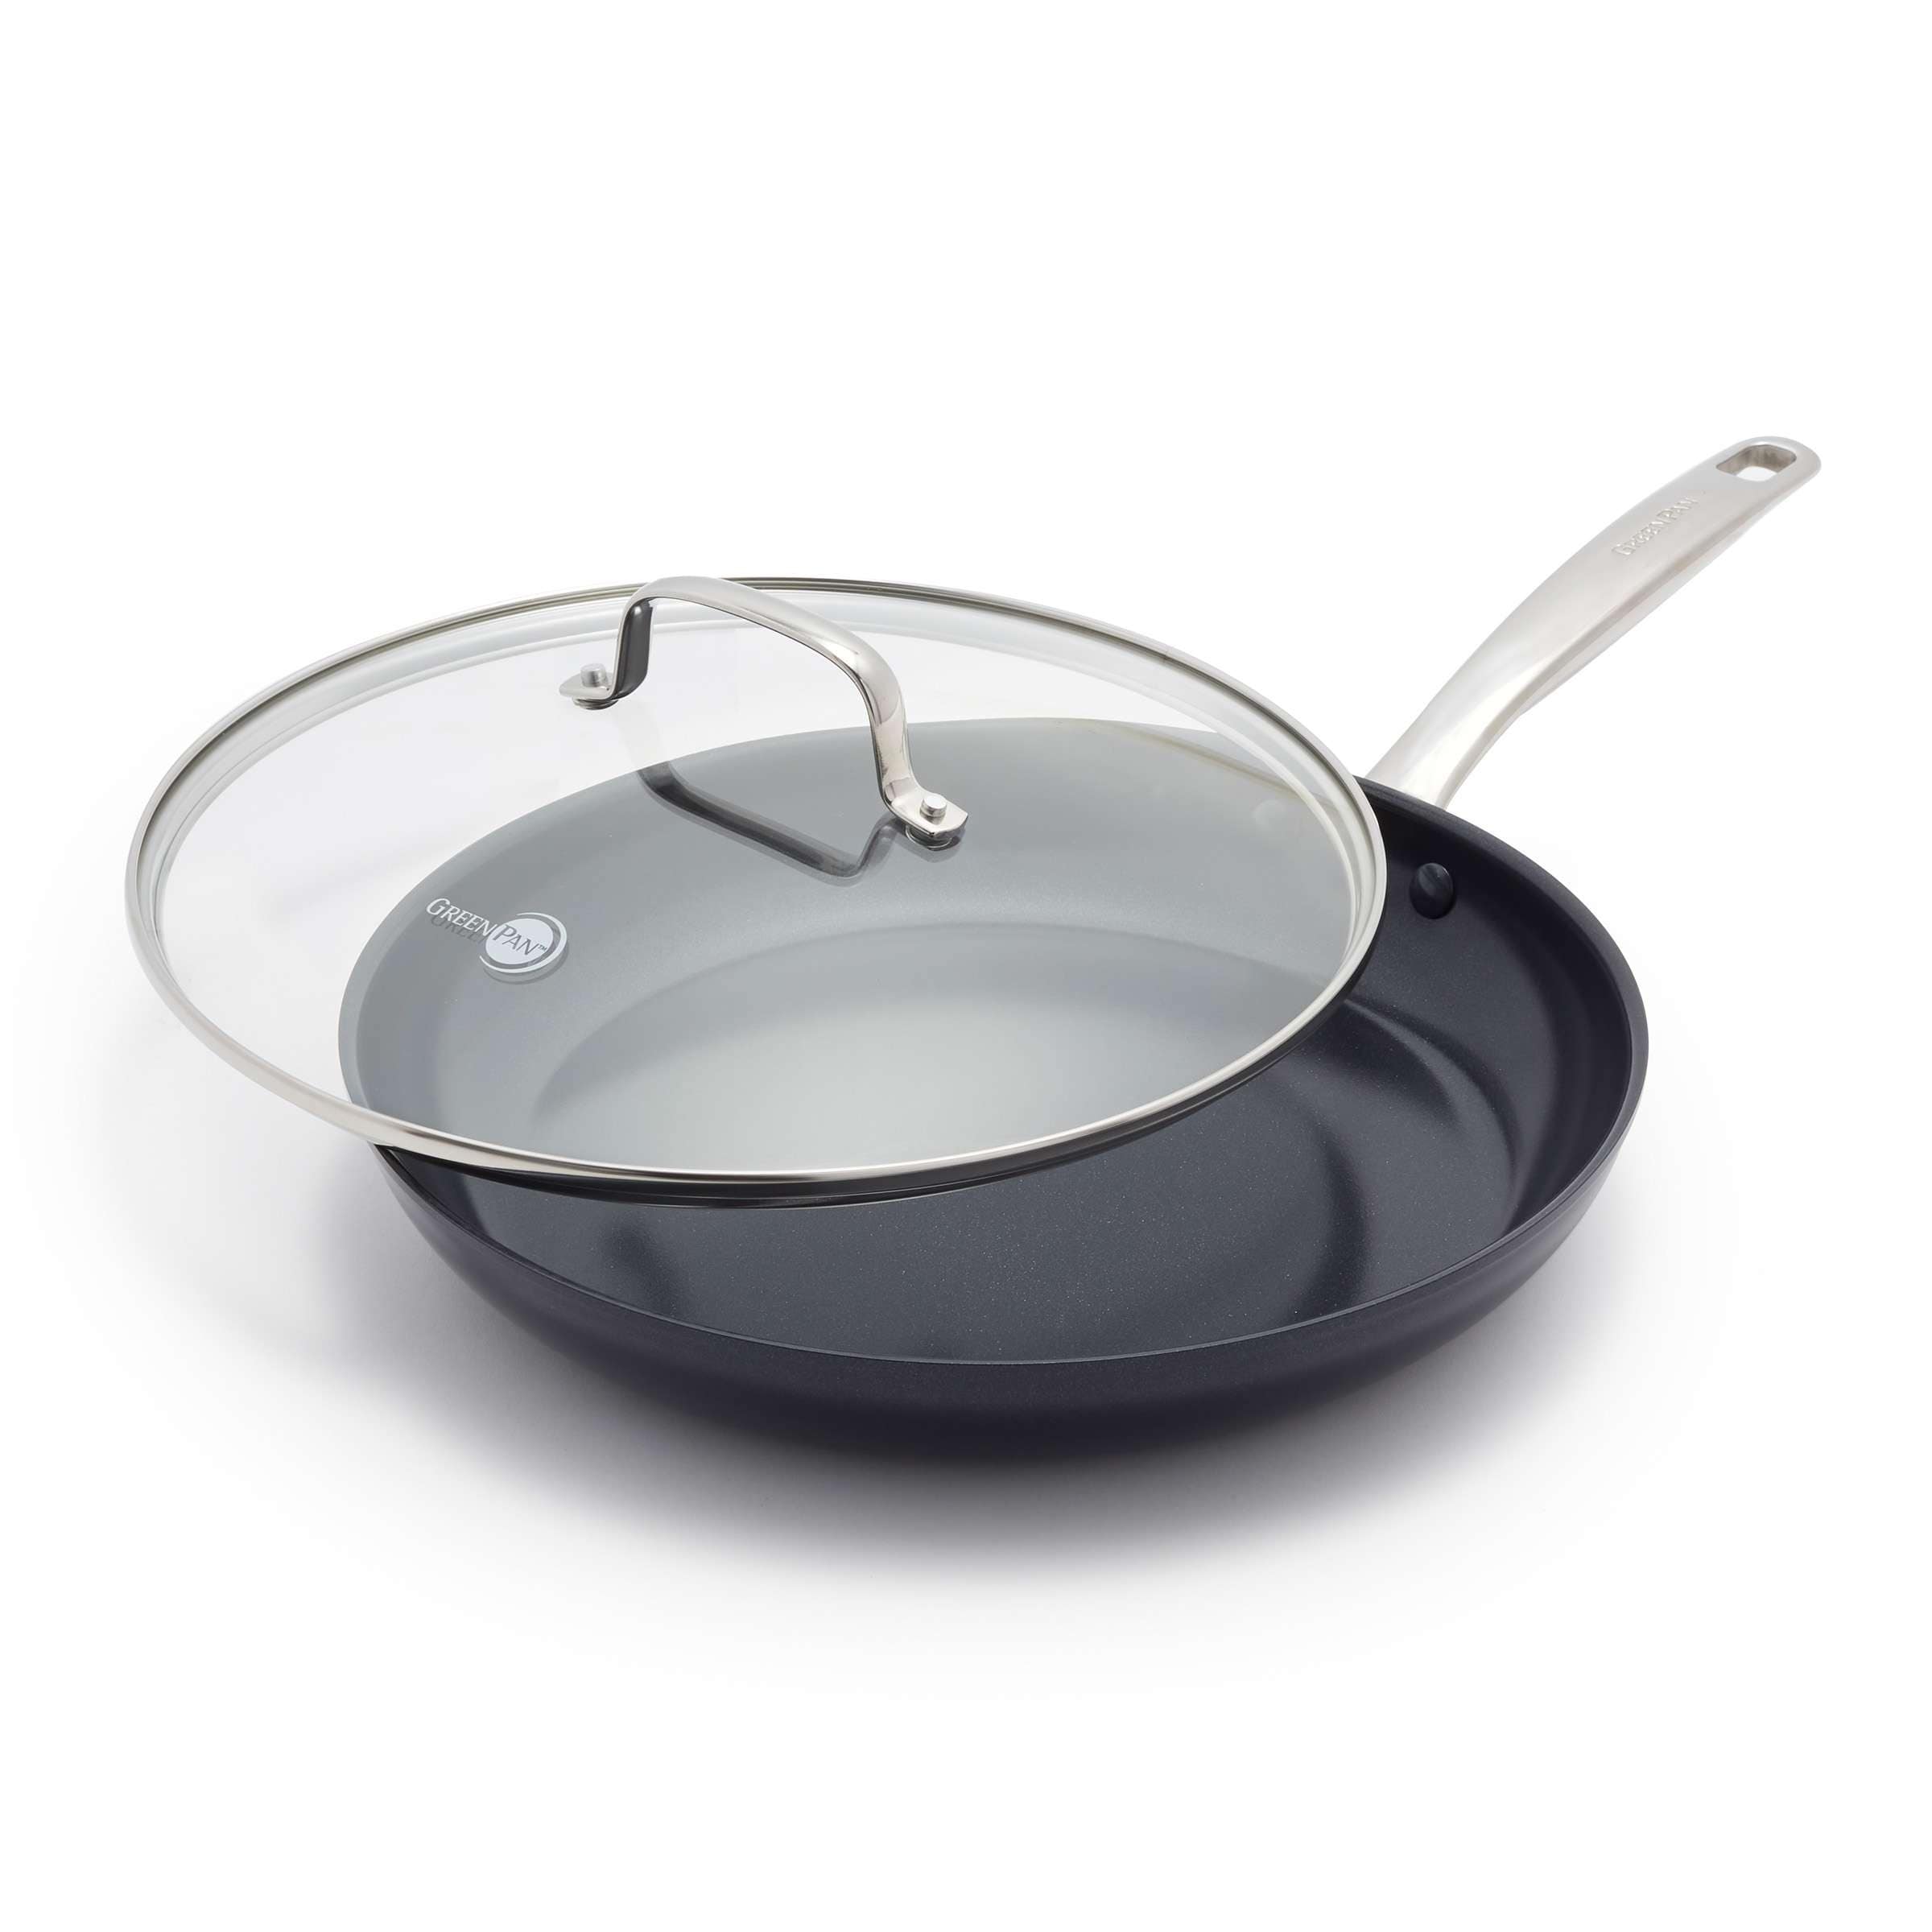 https://ak1.ostkcdn.com/images/products/is/images/direct/f3b1f756cc268aaaa8e010dee609c8537354b00b/GreenPan-Prime-Midnight-12%22-Covered-Fry-Pan.jpg